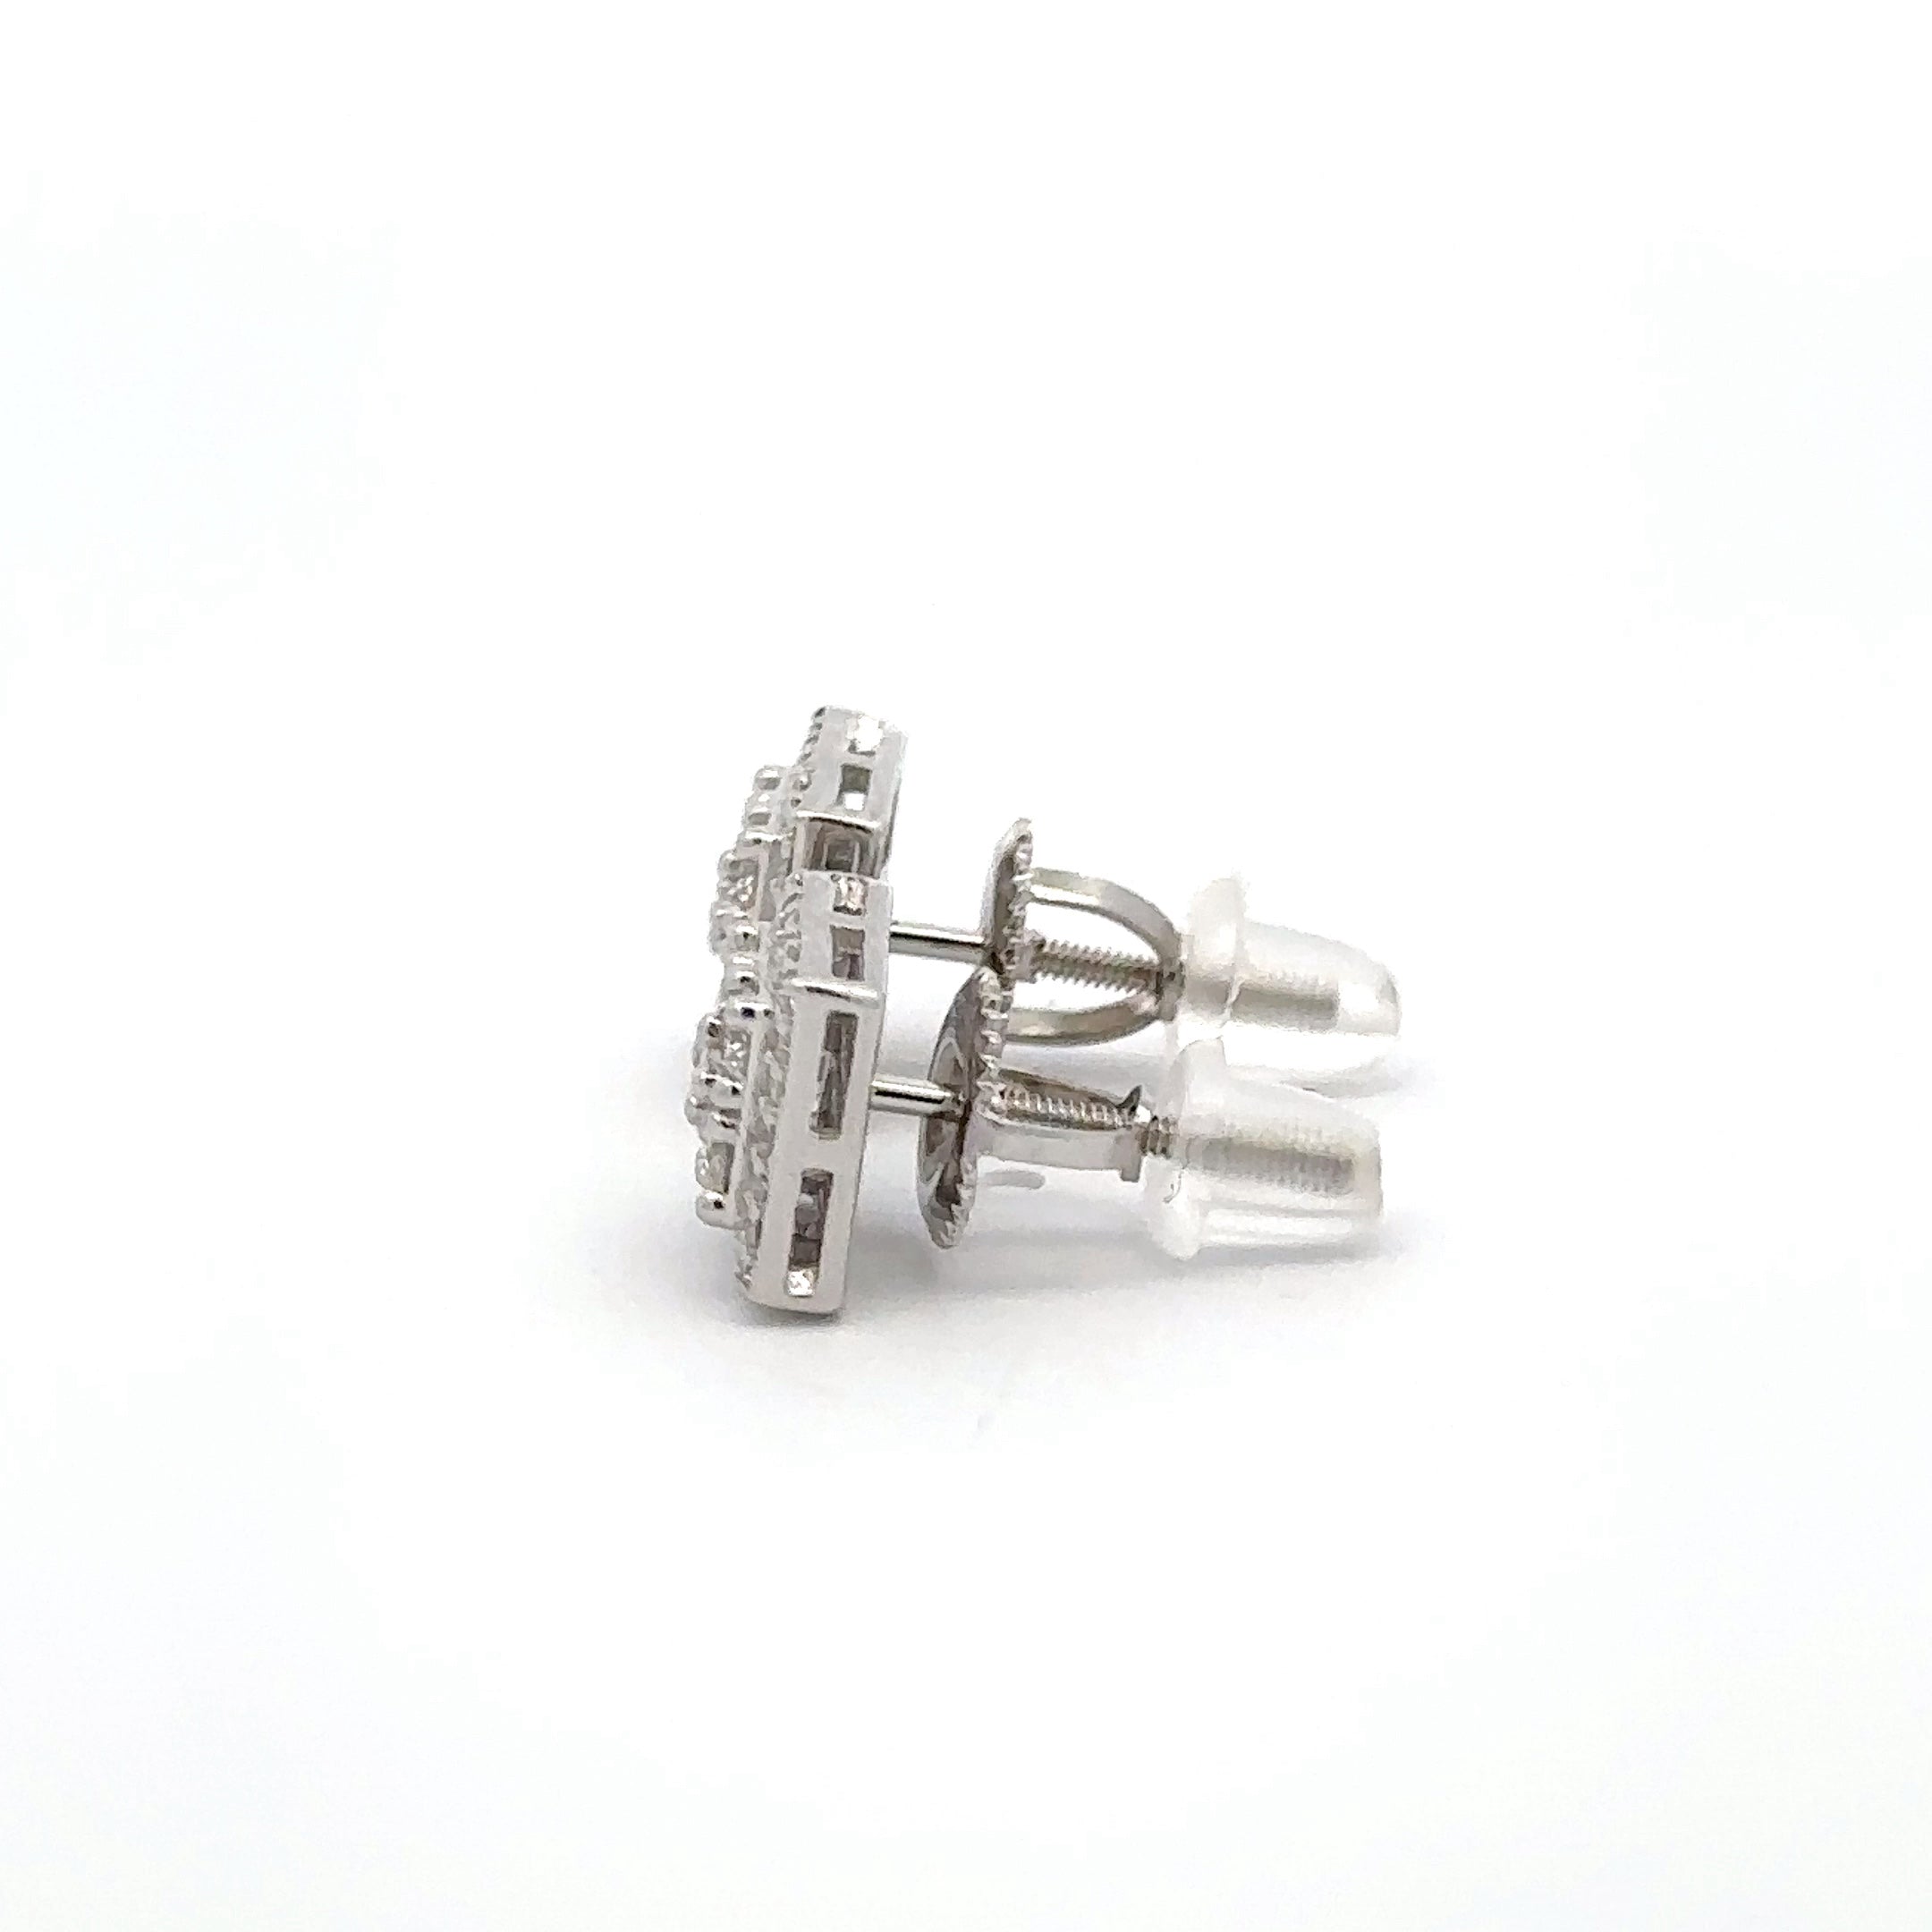 GRANDIOSE 0.57 CTW 925 RHODIUM MOISSANITE ICED OUT EARRING | 994961